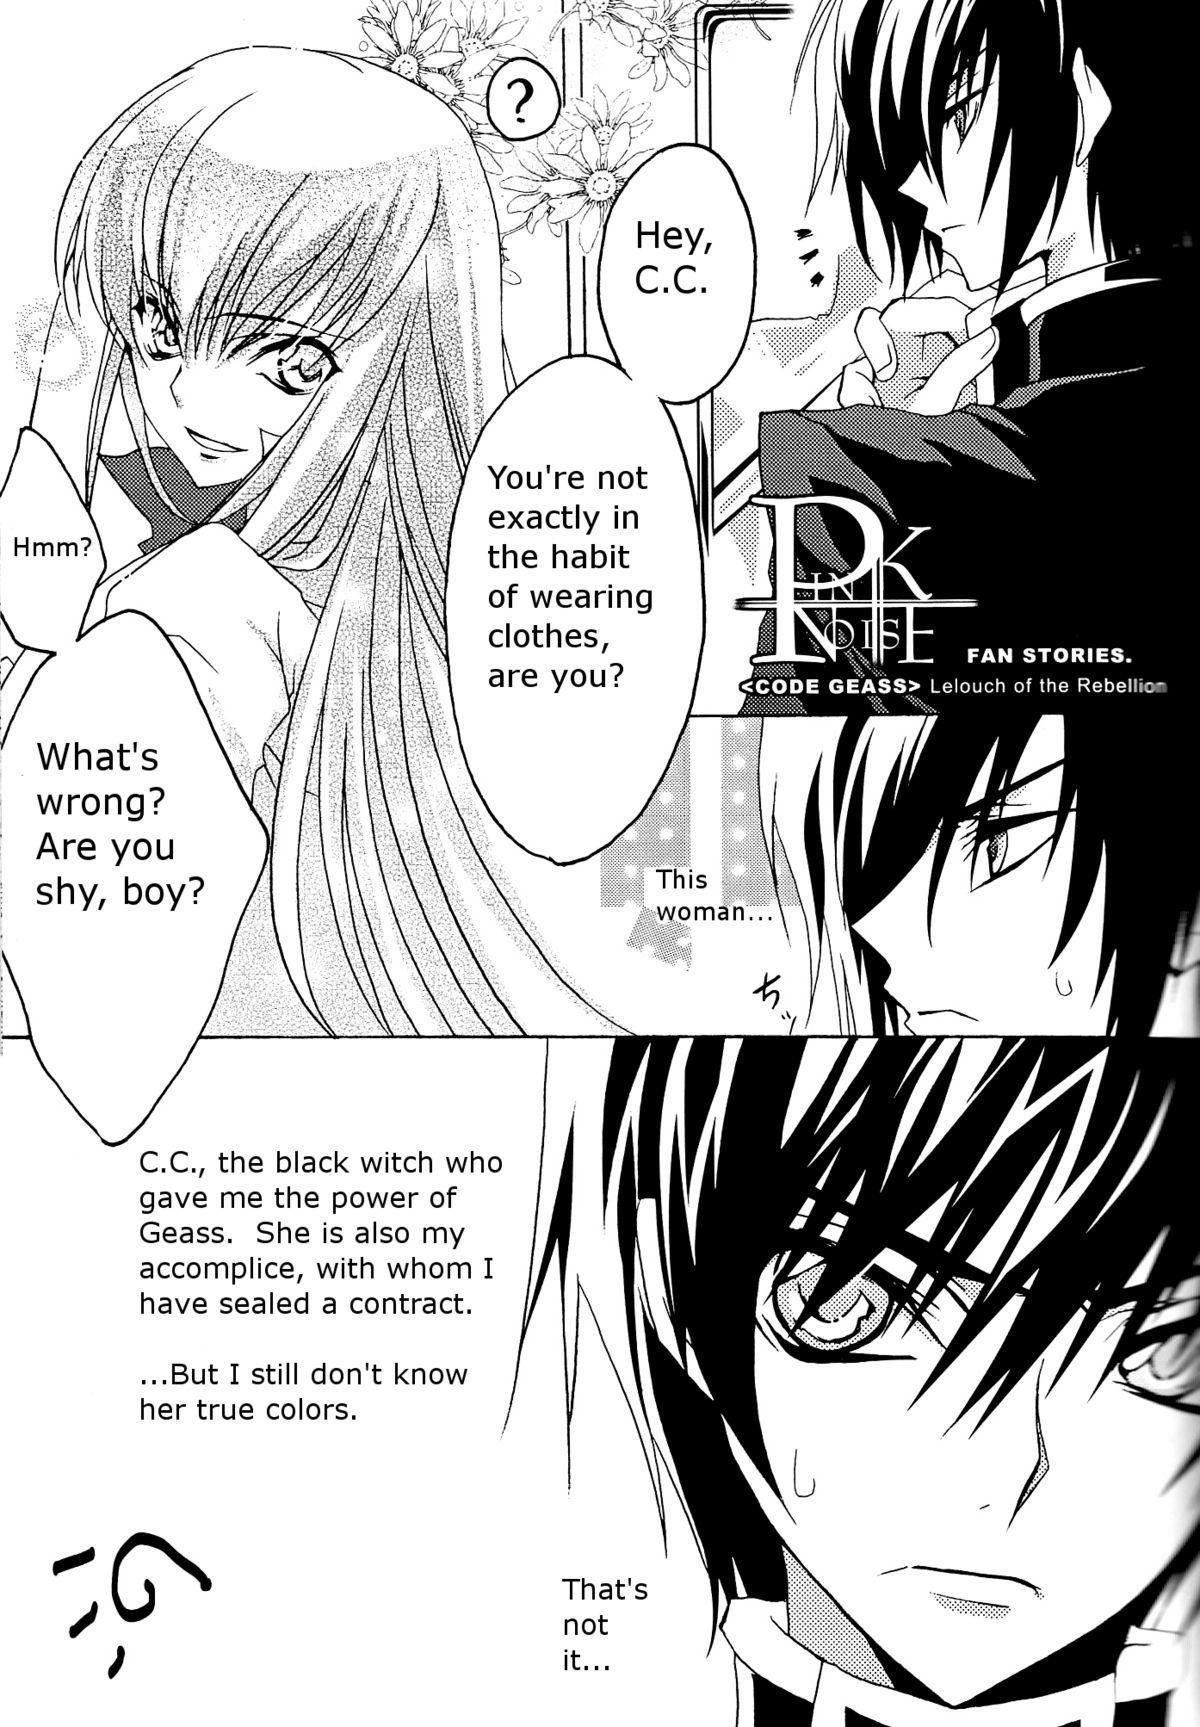 Culito Pink Noise - Code geass Dancing - Page 9